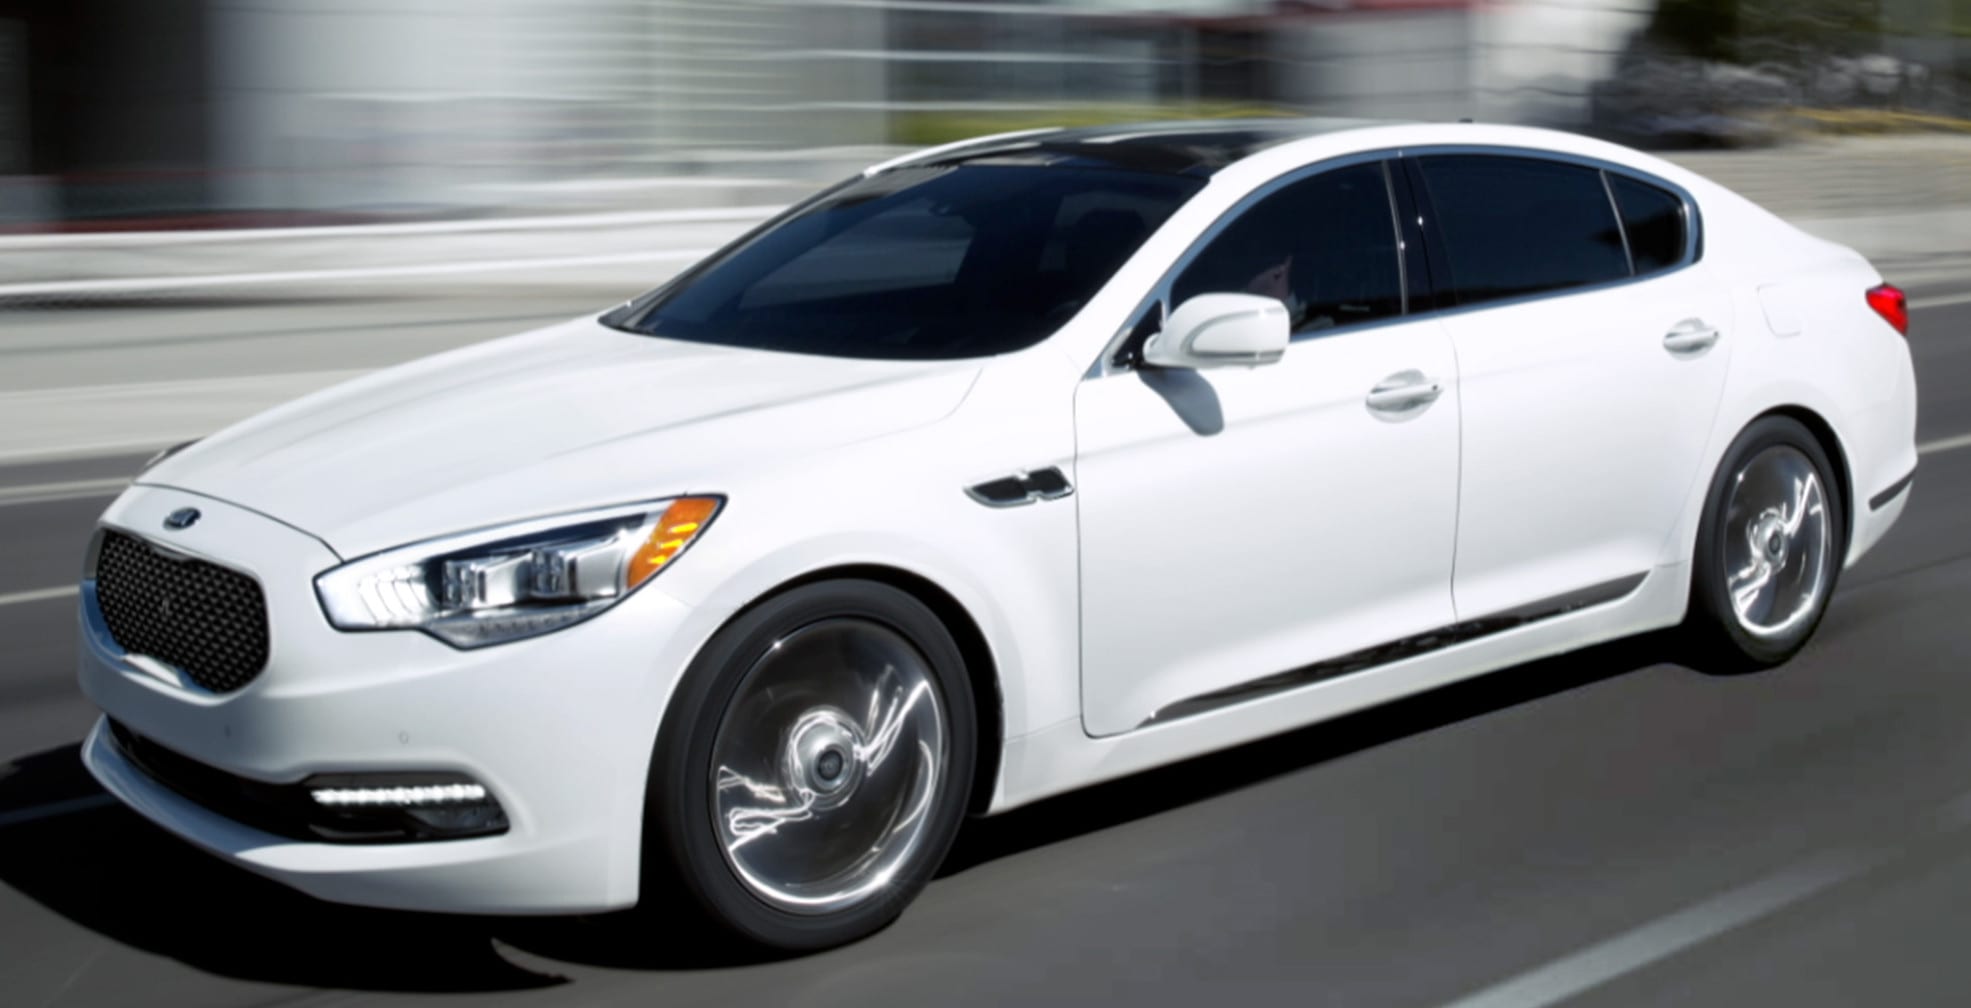 4 Things to Know About the Kia K900